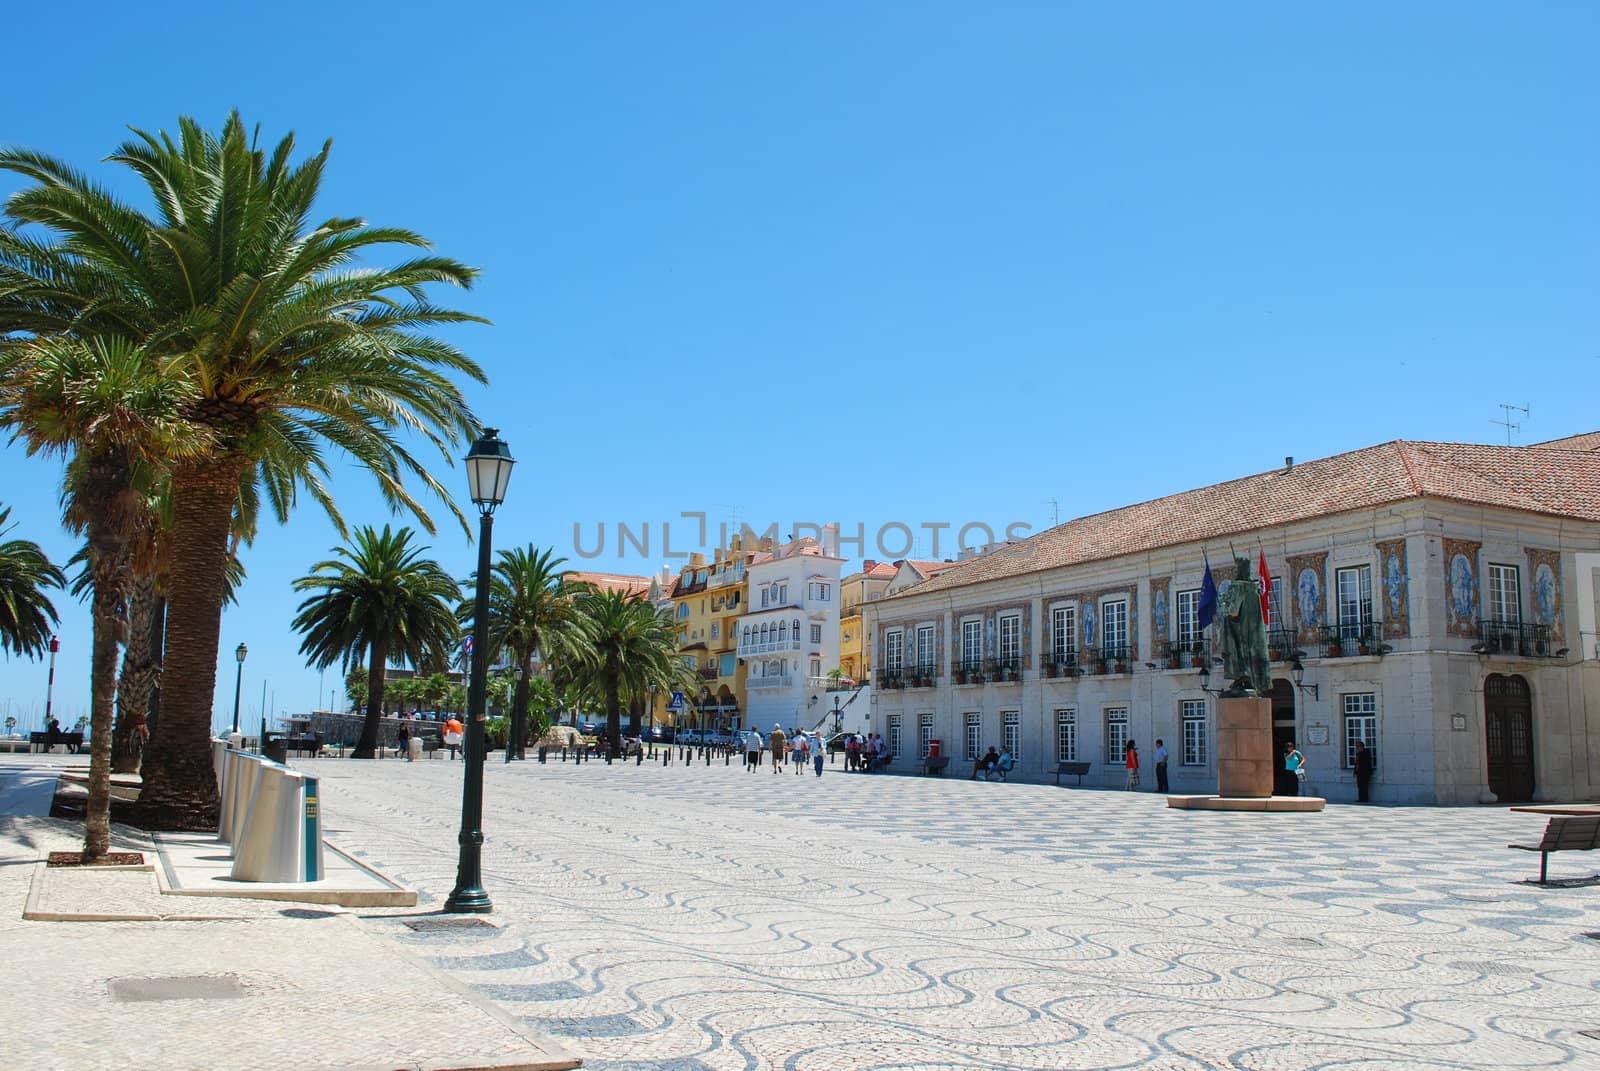 Famous square in Cascais, Portugal by luissantos84